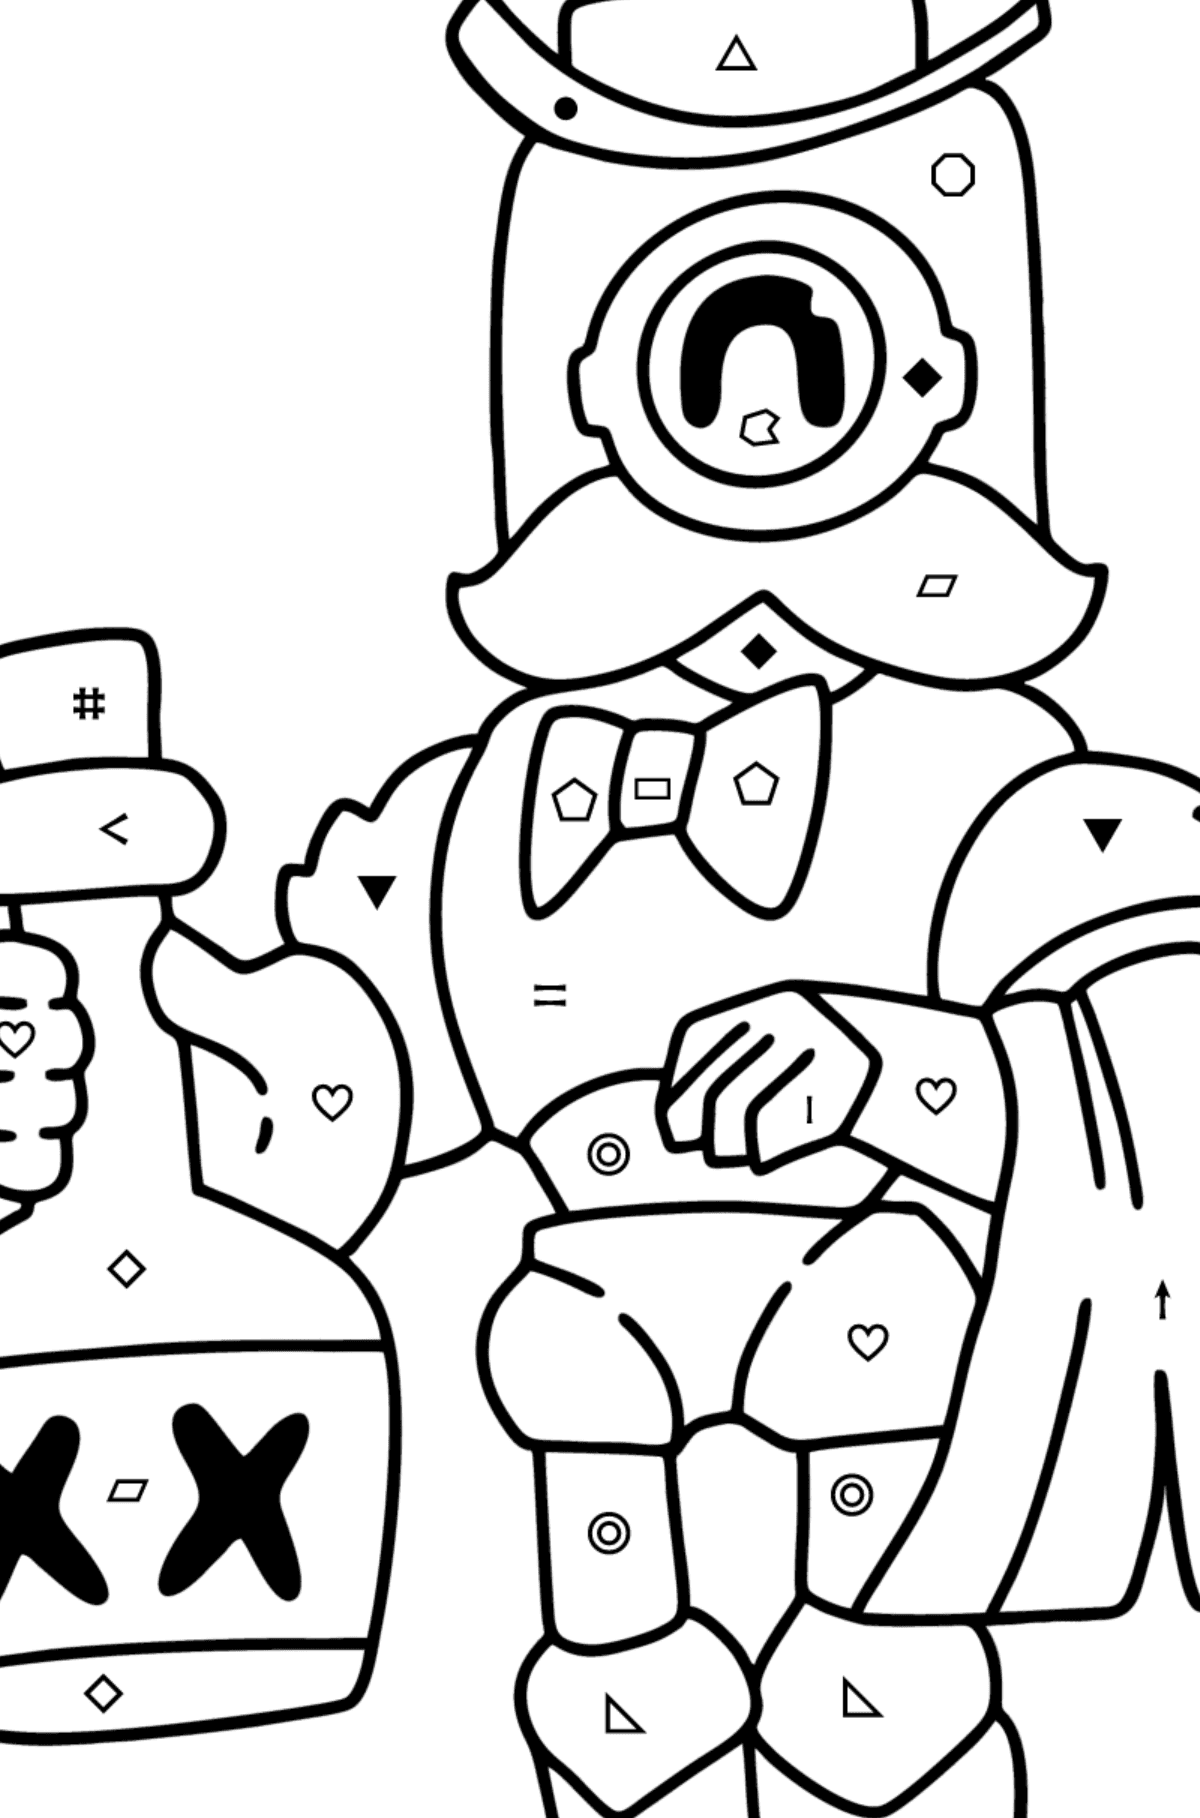 Brawl Stars Barley colouring page - Coloring by Symbols and Geometric Shapes for Kids